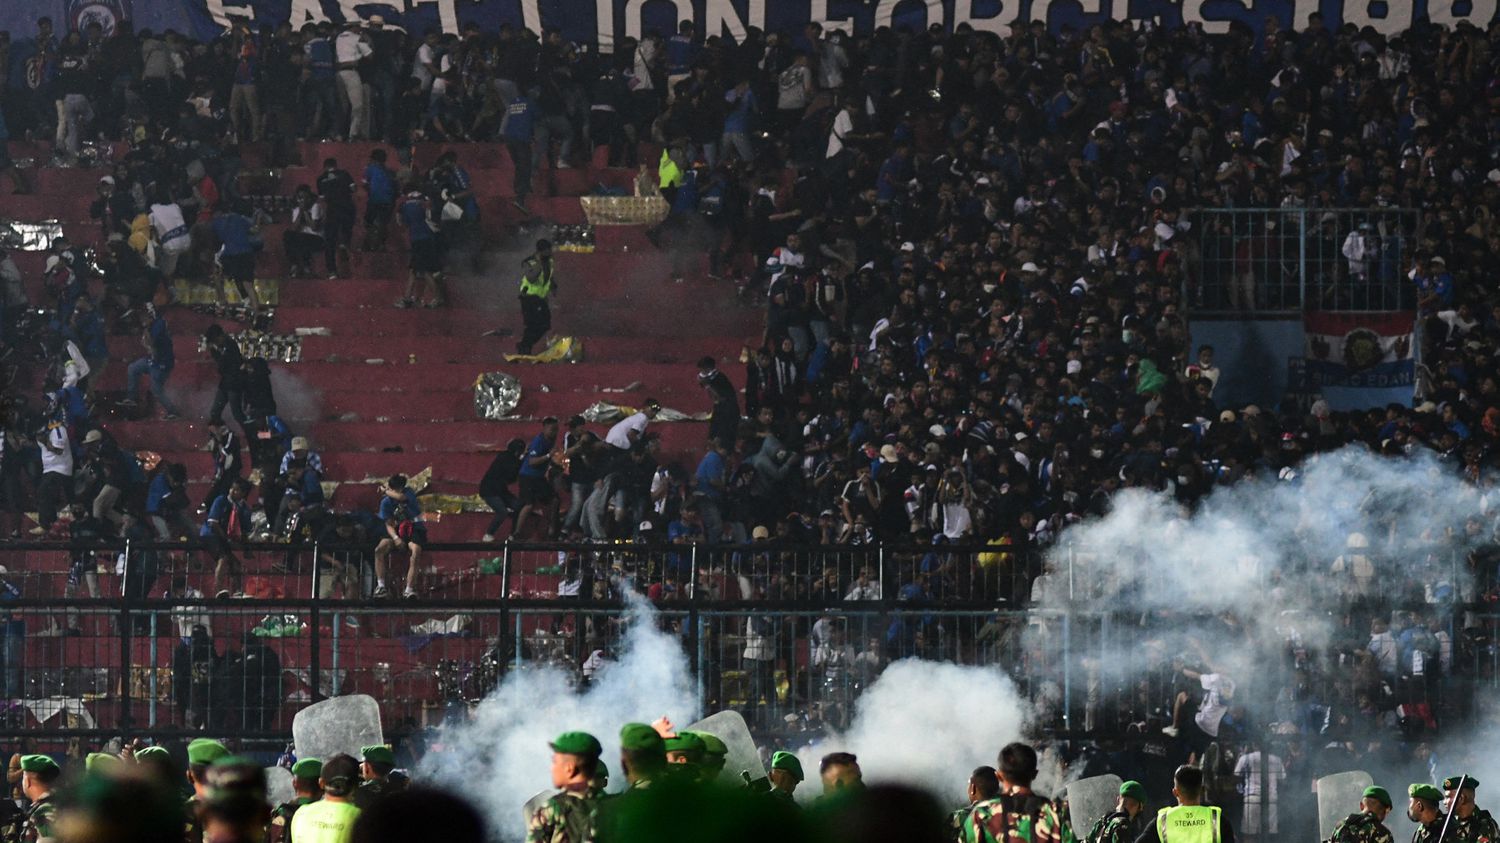 Indonesia: at least 129 dead after a crowd movement in a football stadium
